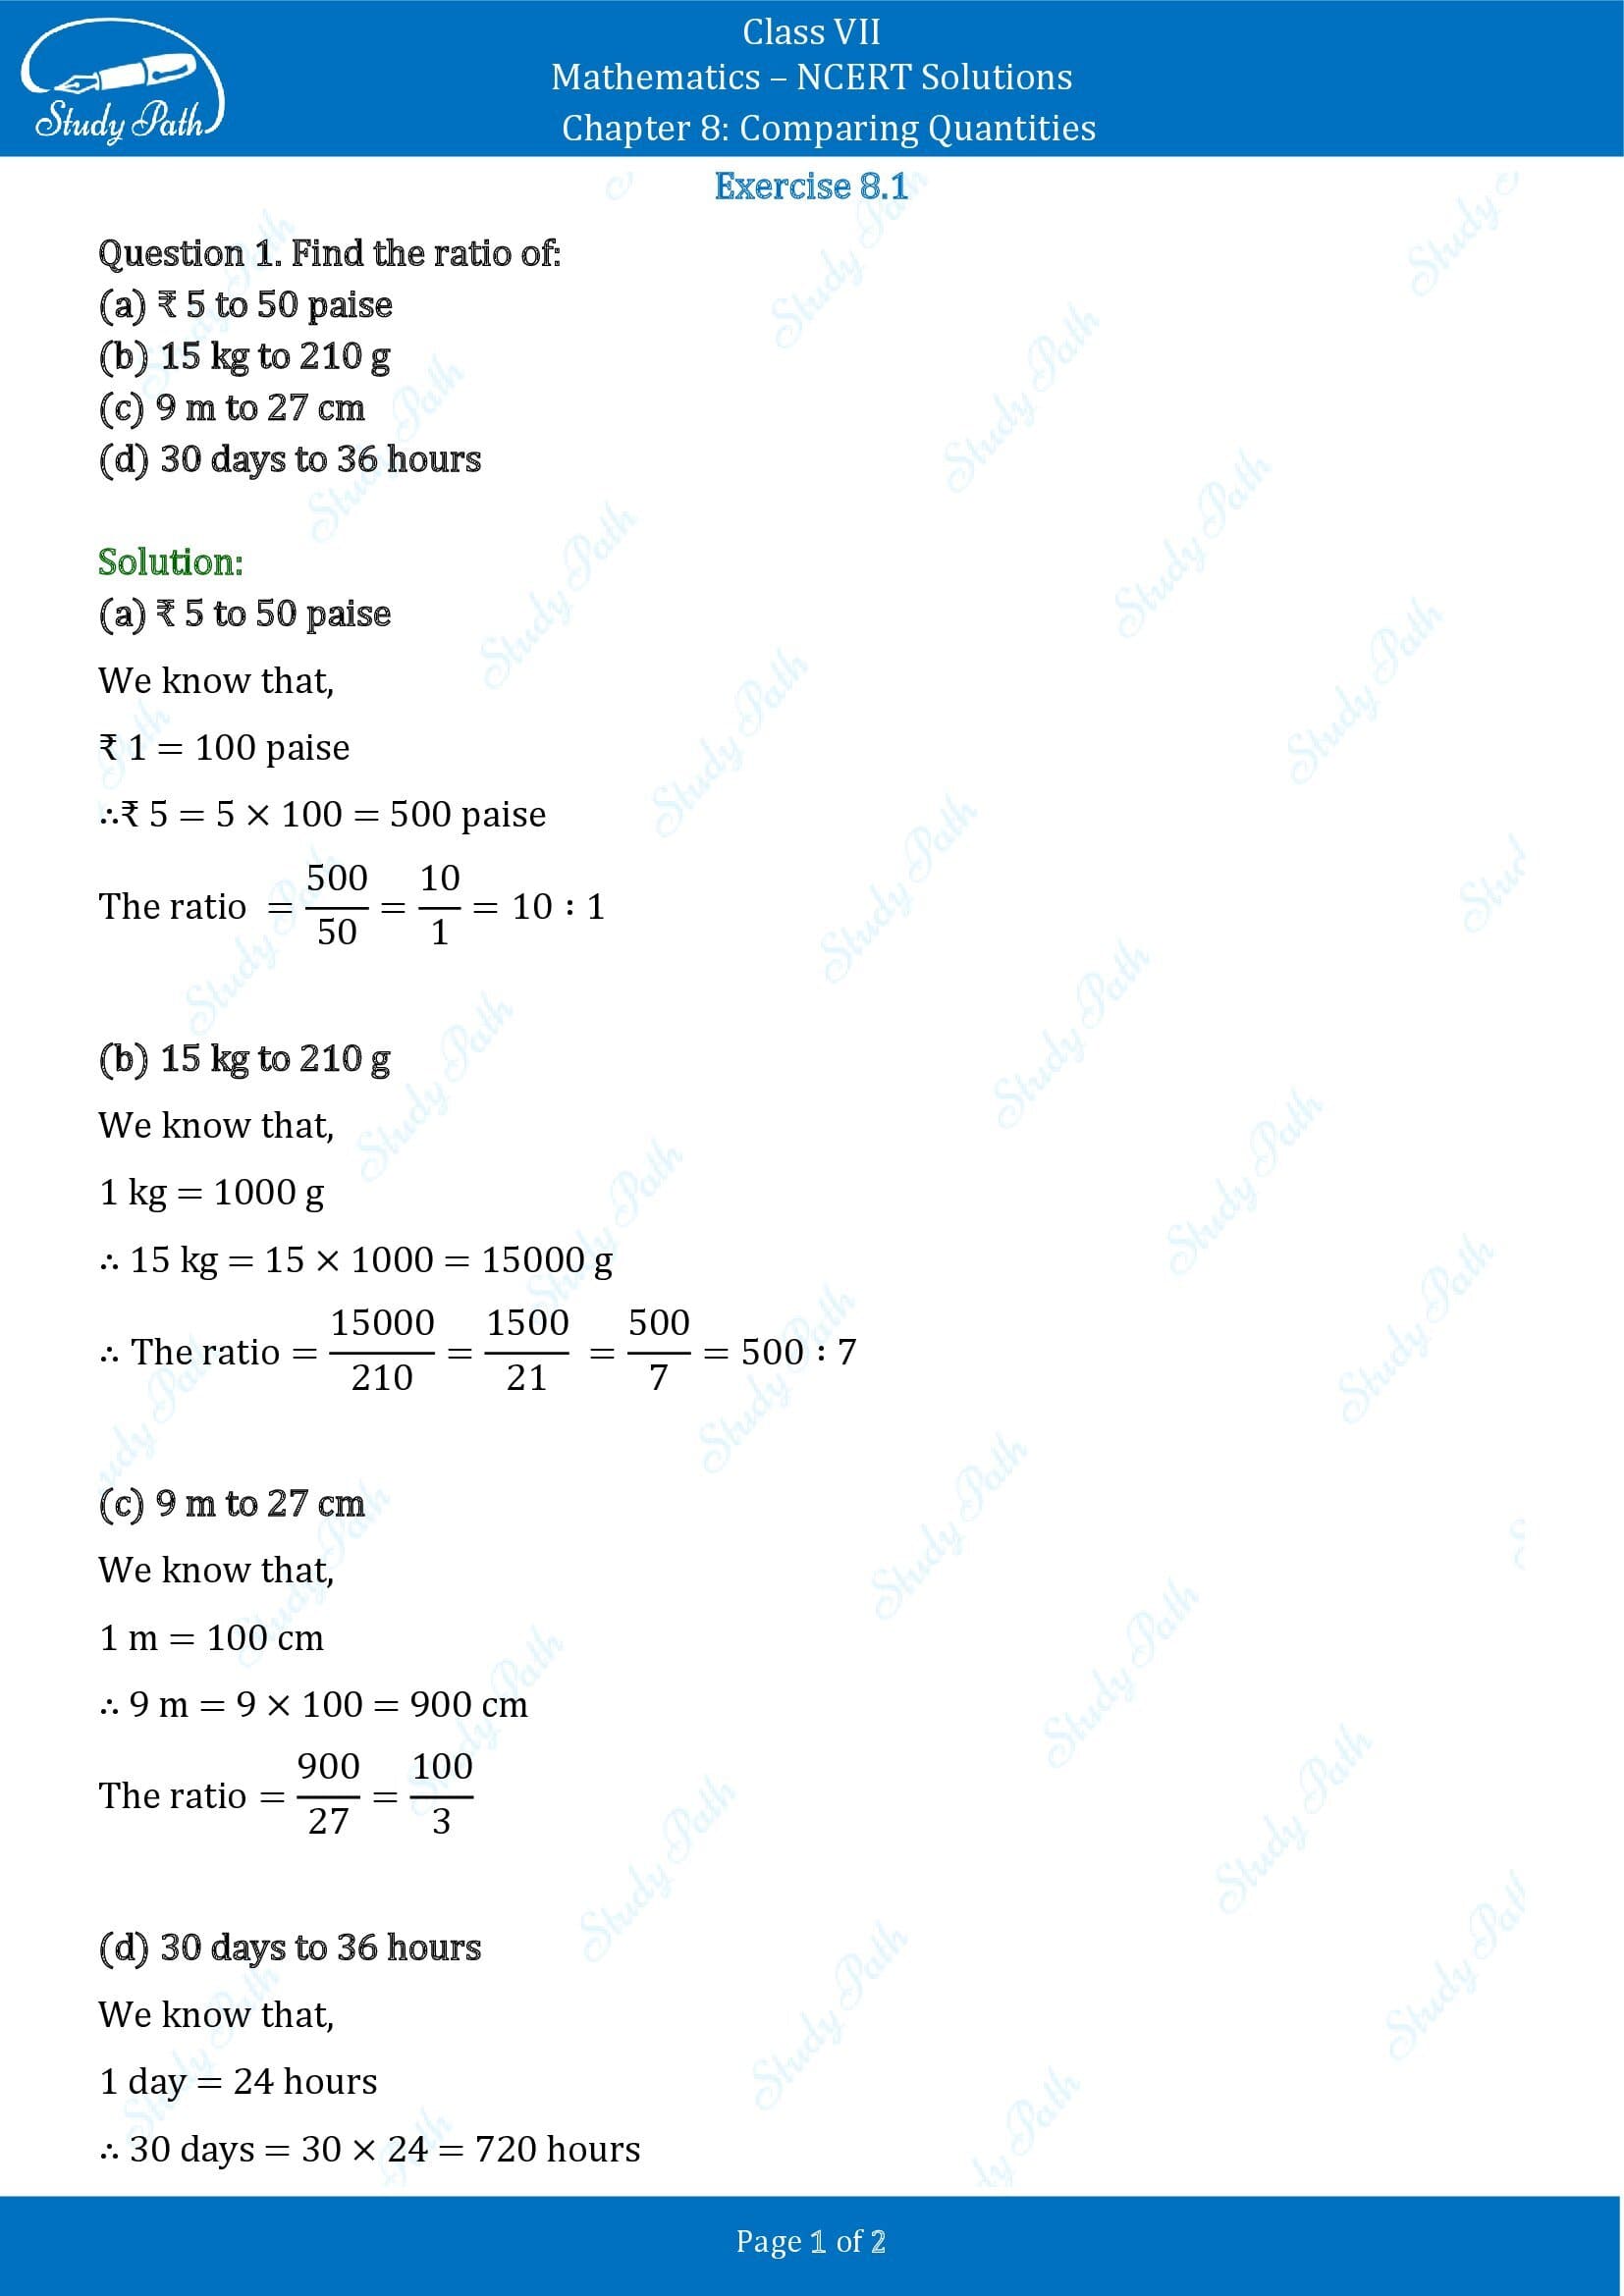 NCERT Solutions for Class 7 Maths Chapter 8 Comparing Quantities Exercise 8.1 00001